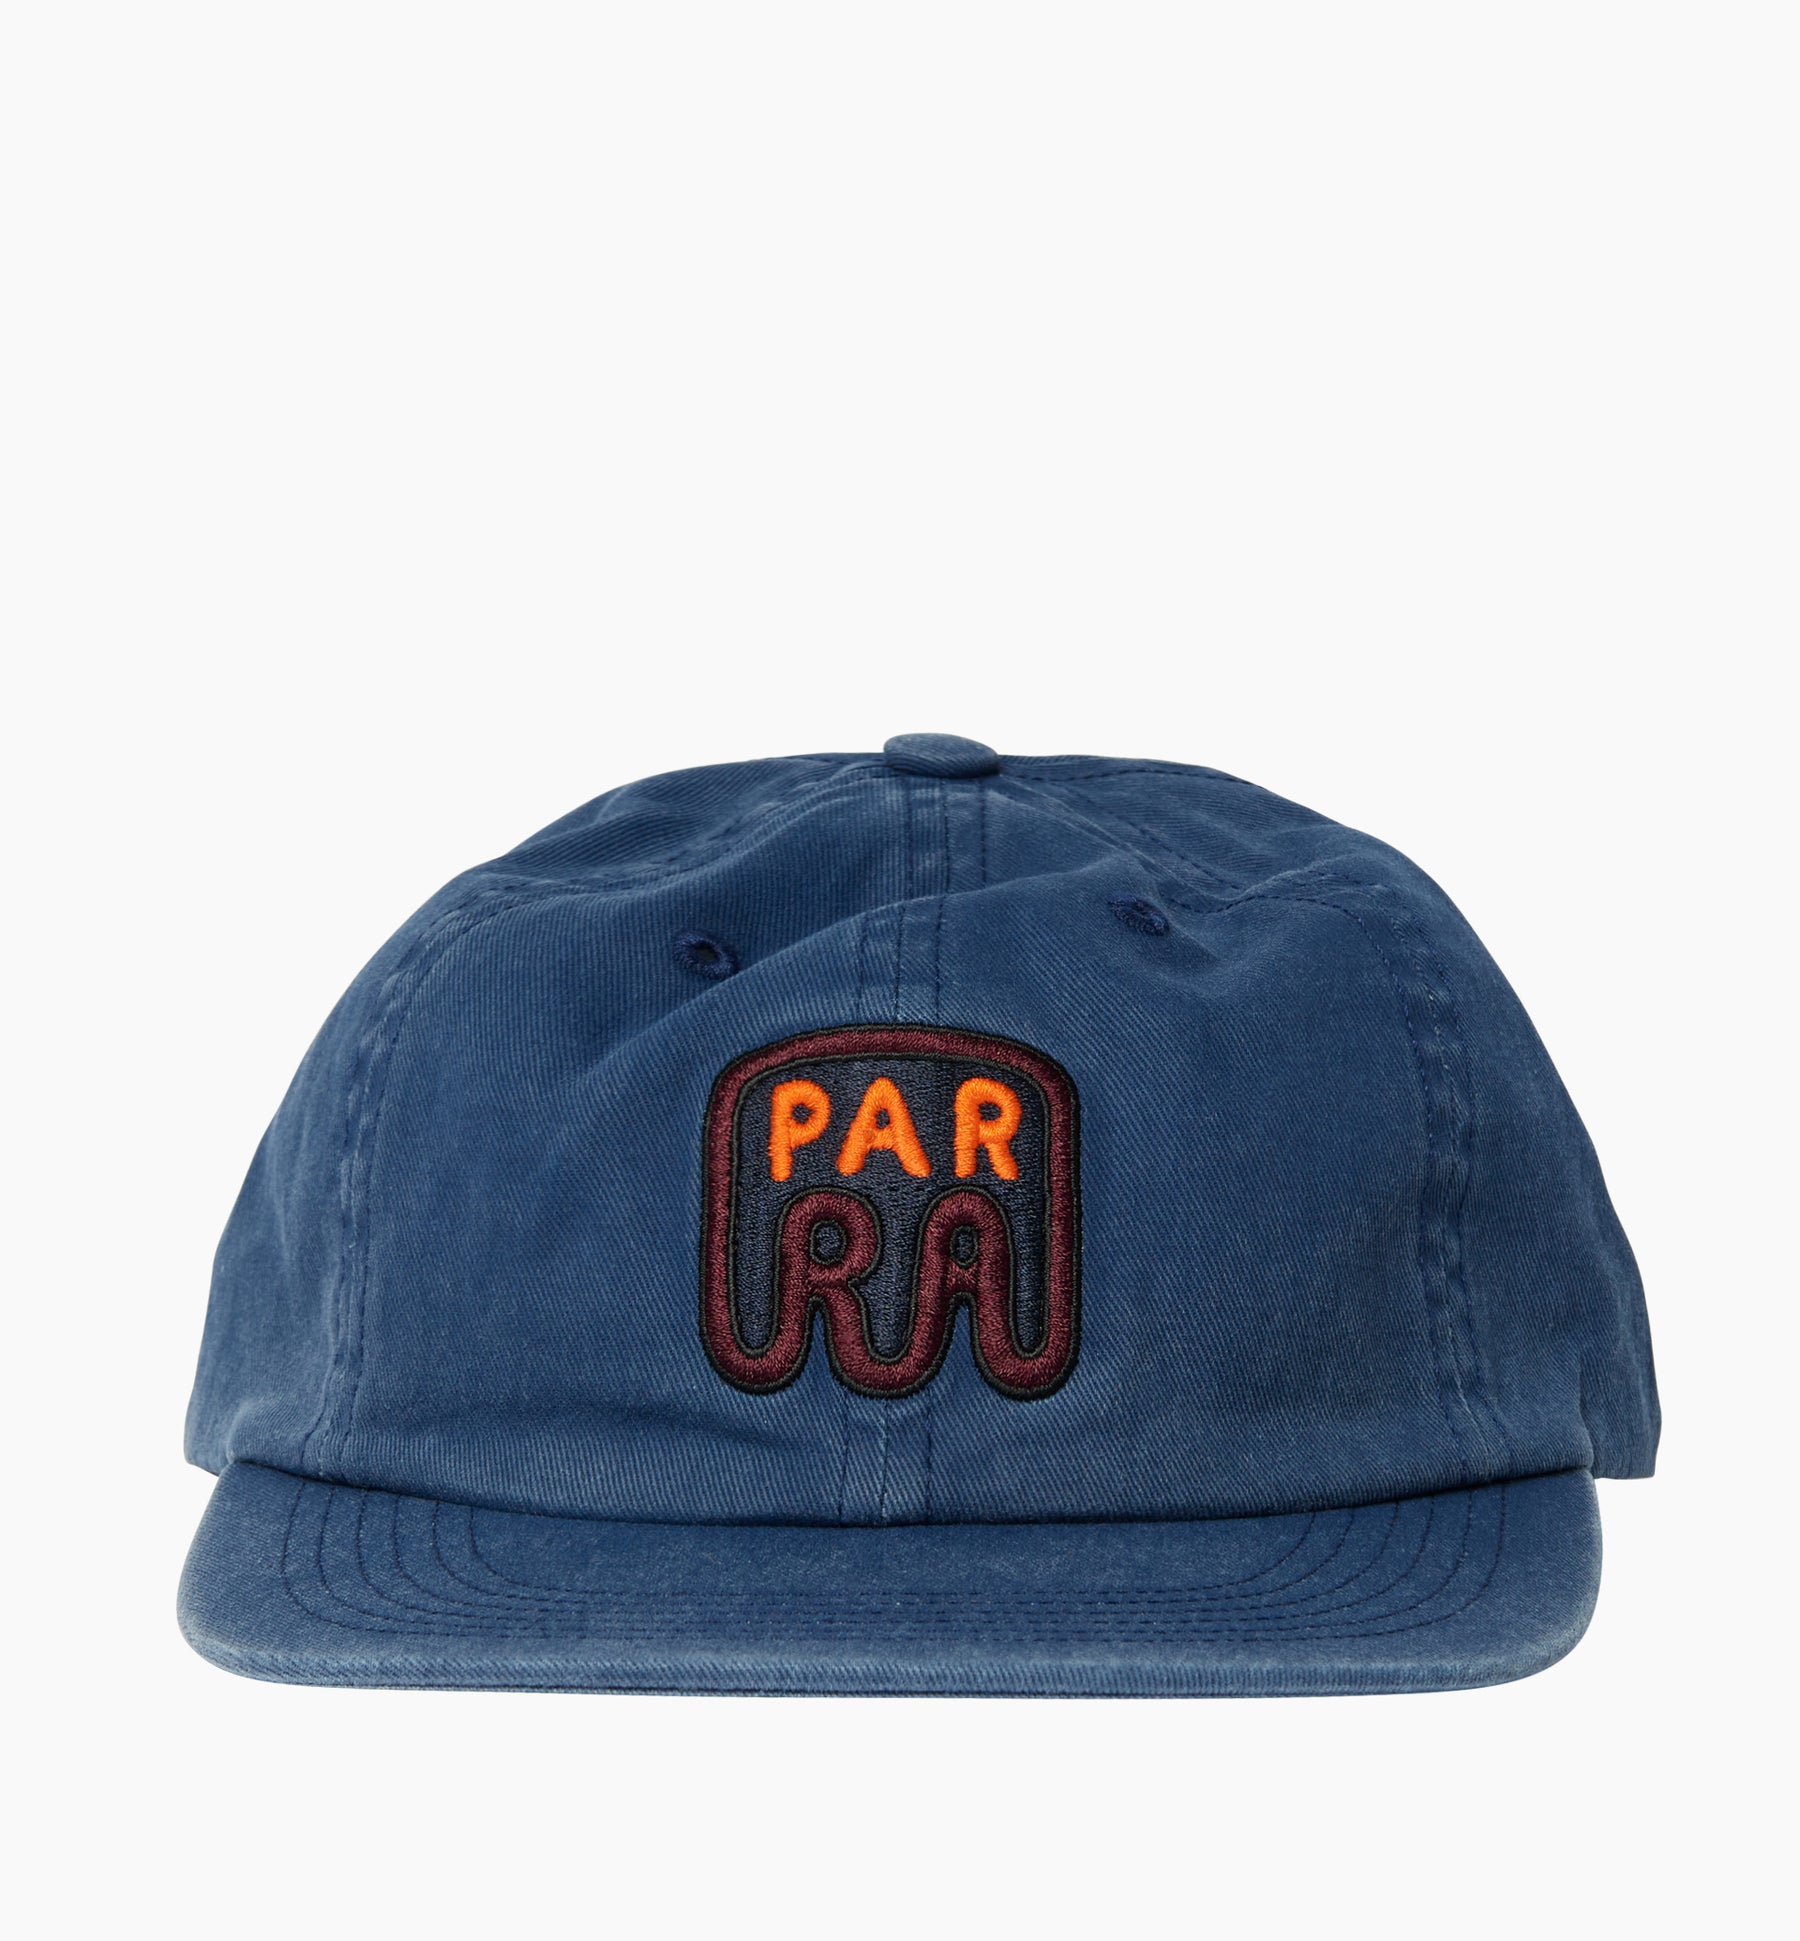 Fast Food Logo Six Panel Hat in Navy Blue